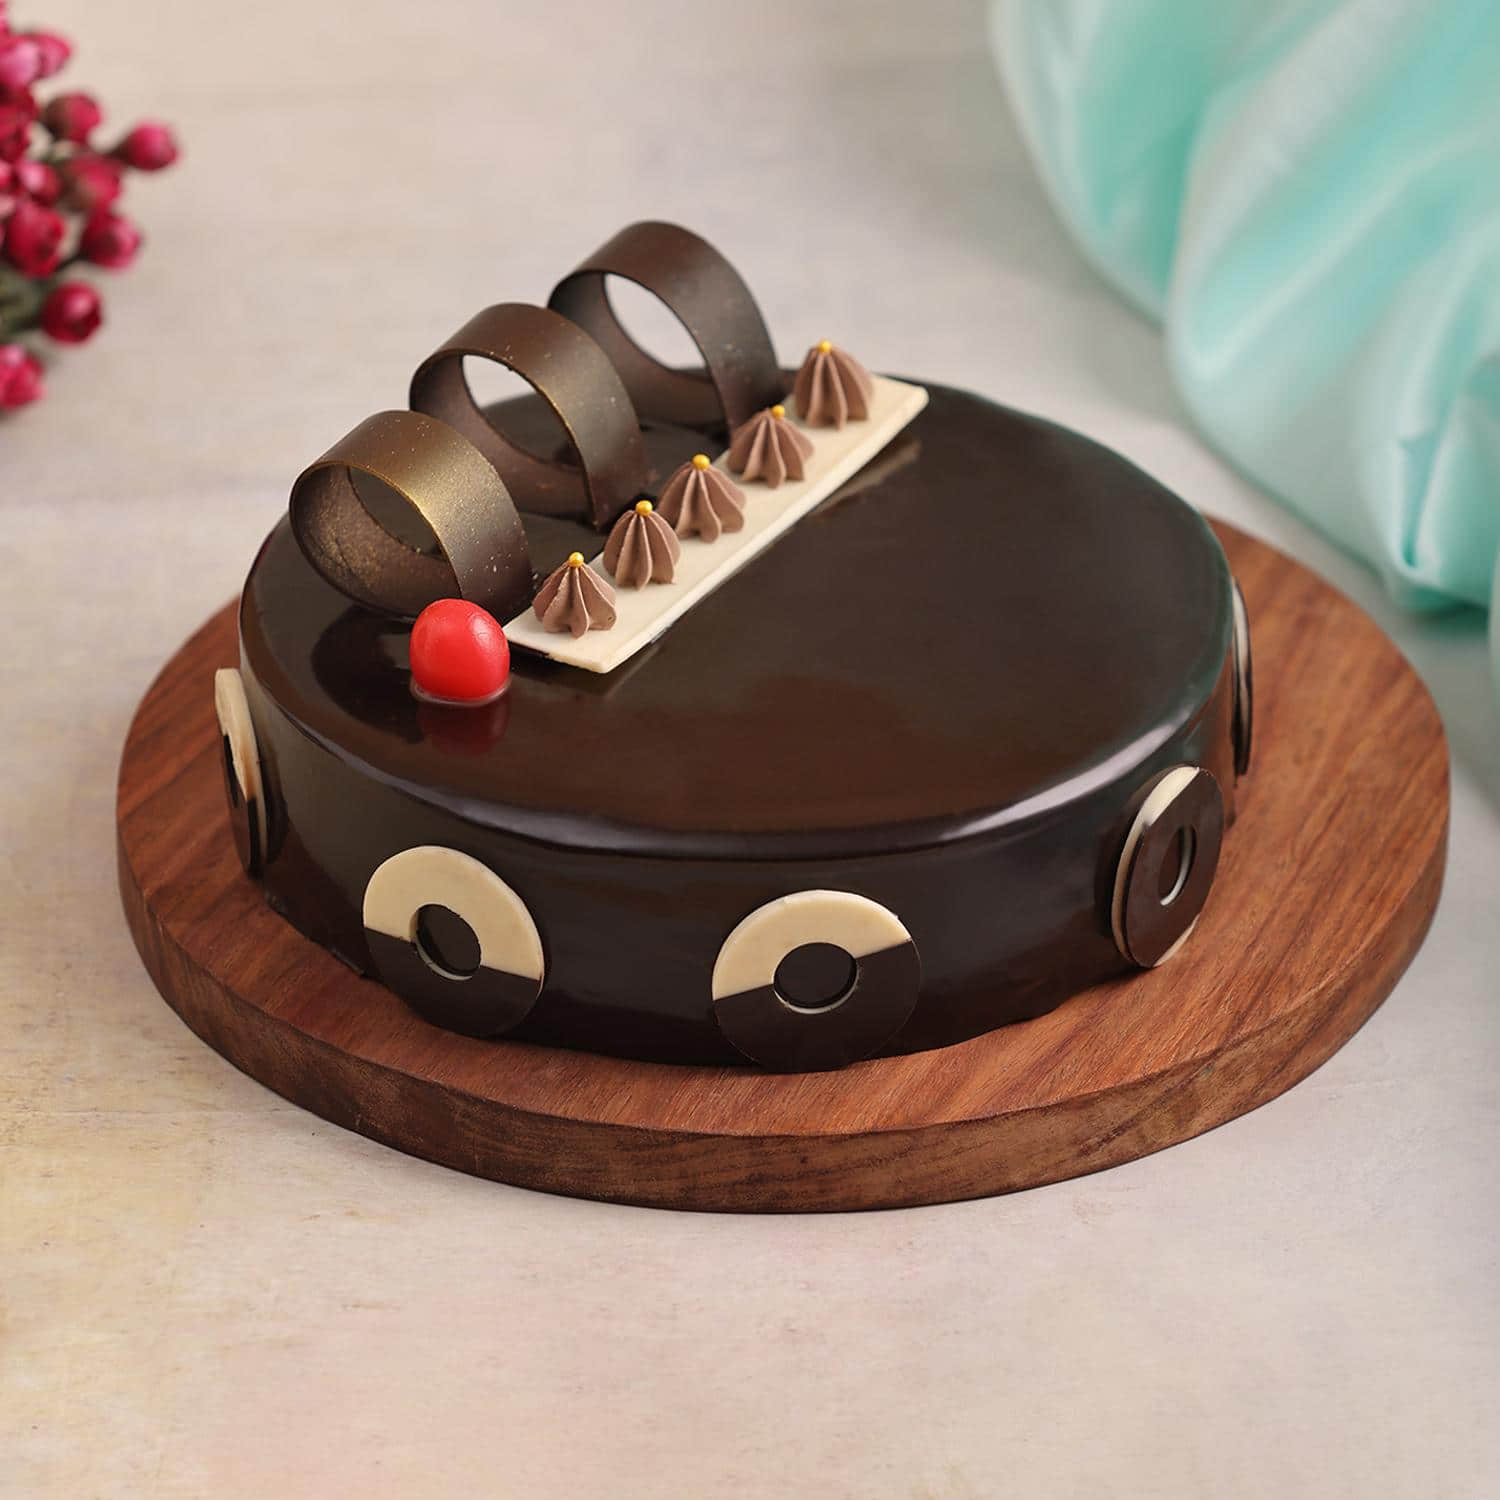 Buy / Send Black Forest Oreo Cake 1kg to Lucknow from Cakes and bakes